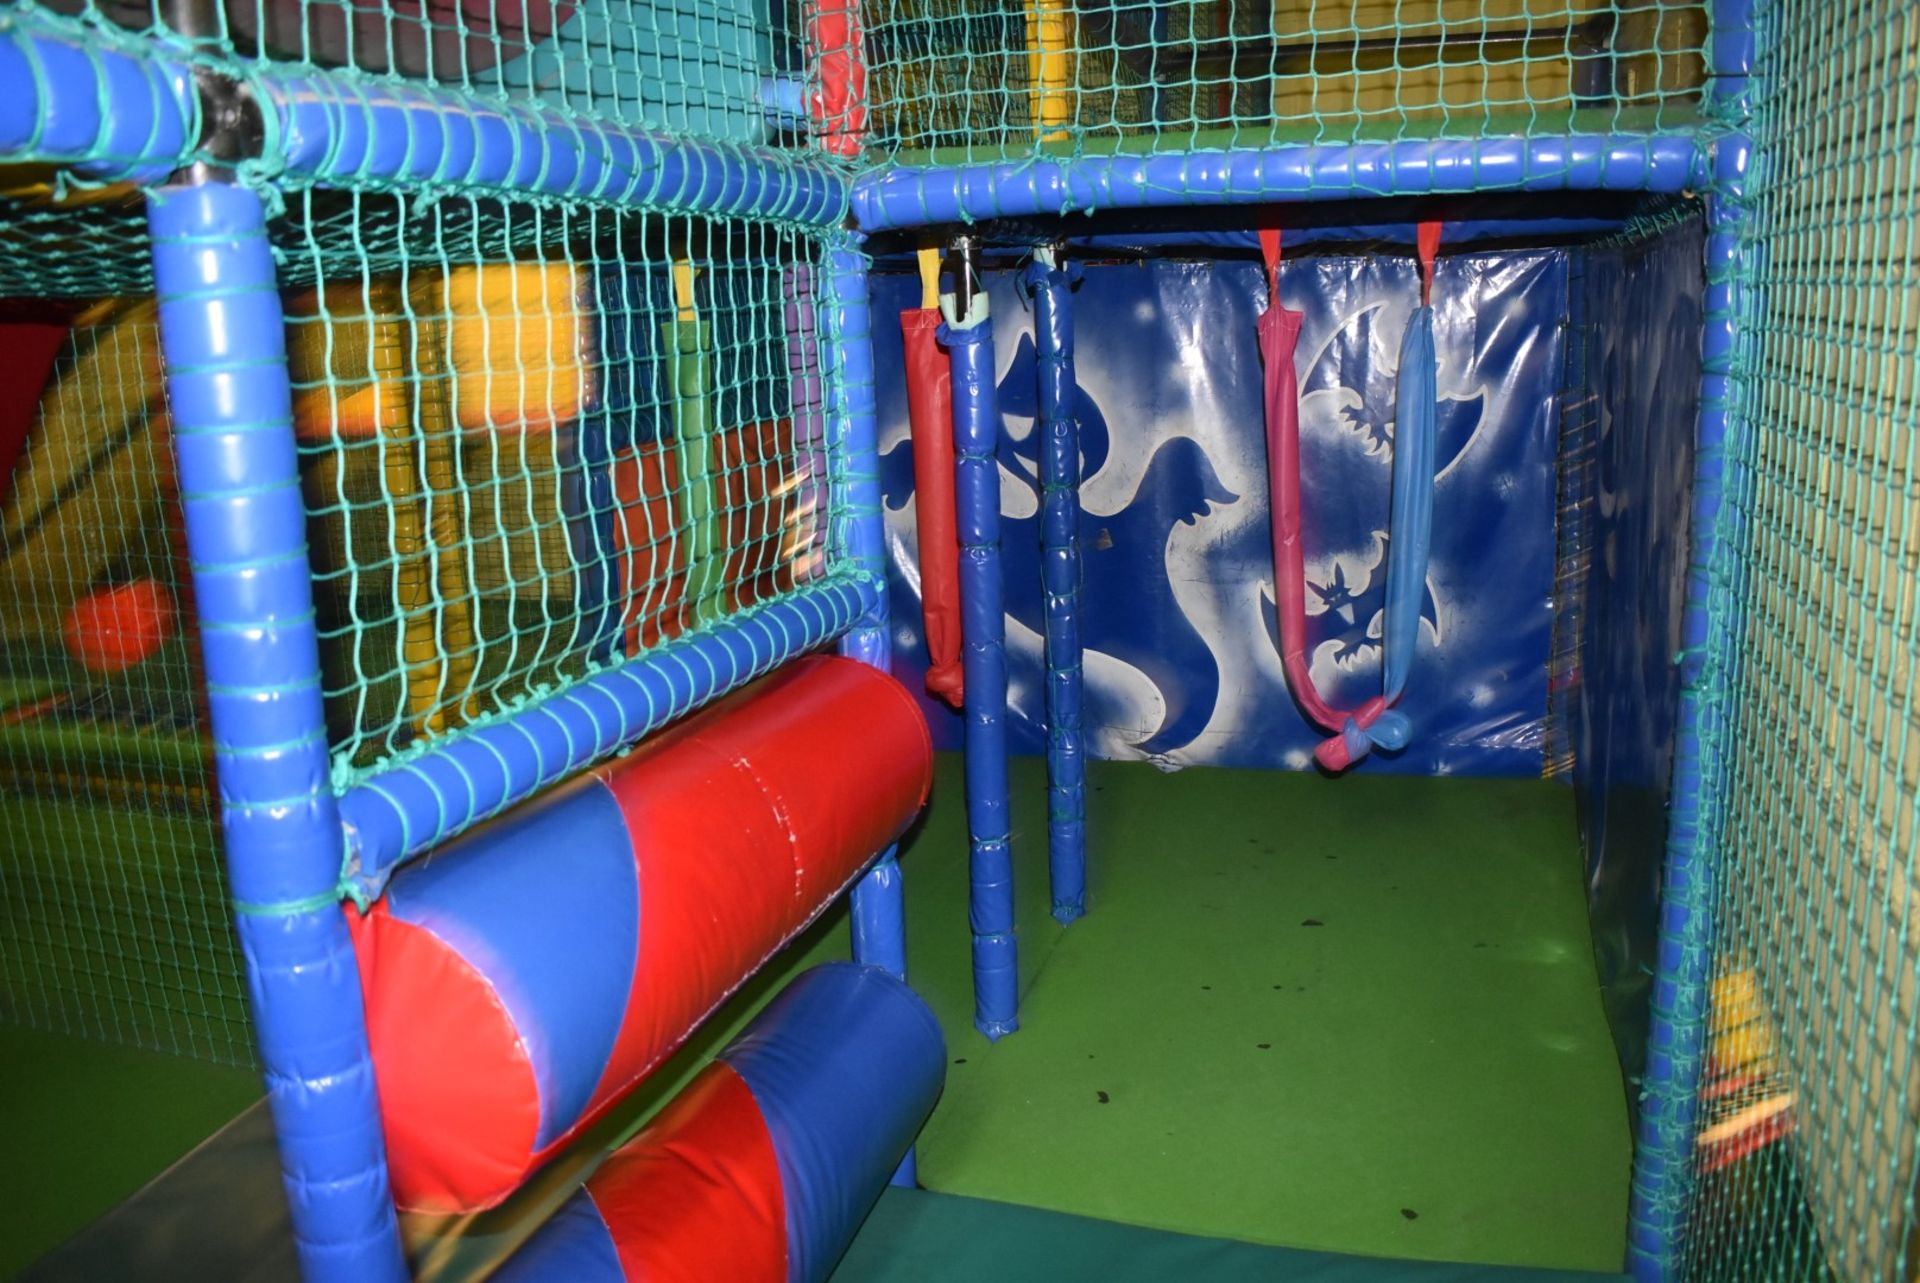 Bramleys Big Adventure Playground - Giant Action-Packed Playcentre With Slides, Zip Line Swings, - Image 53 of 128